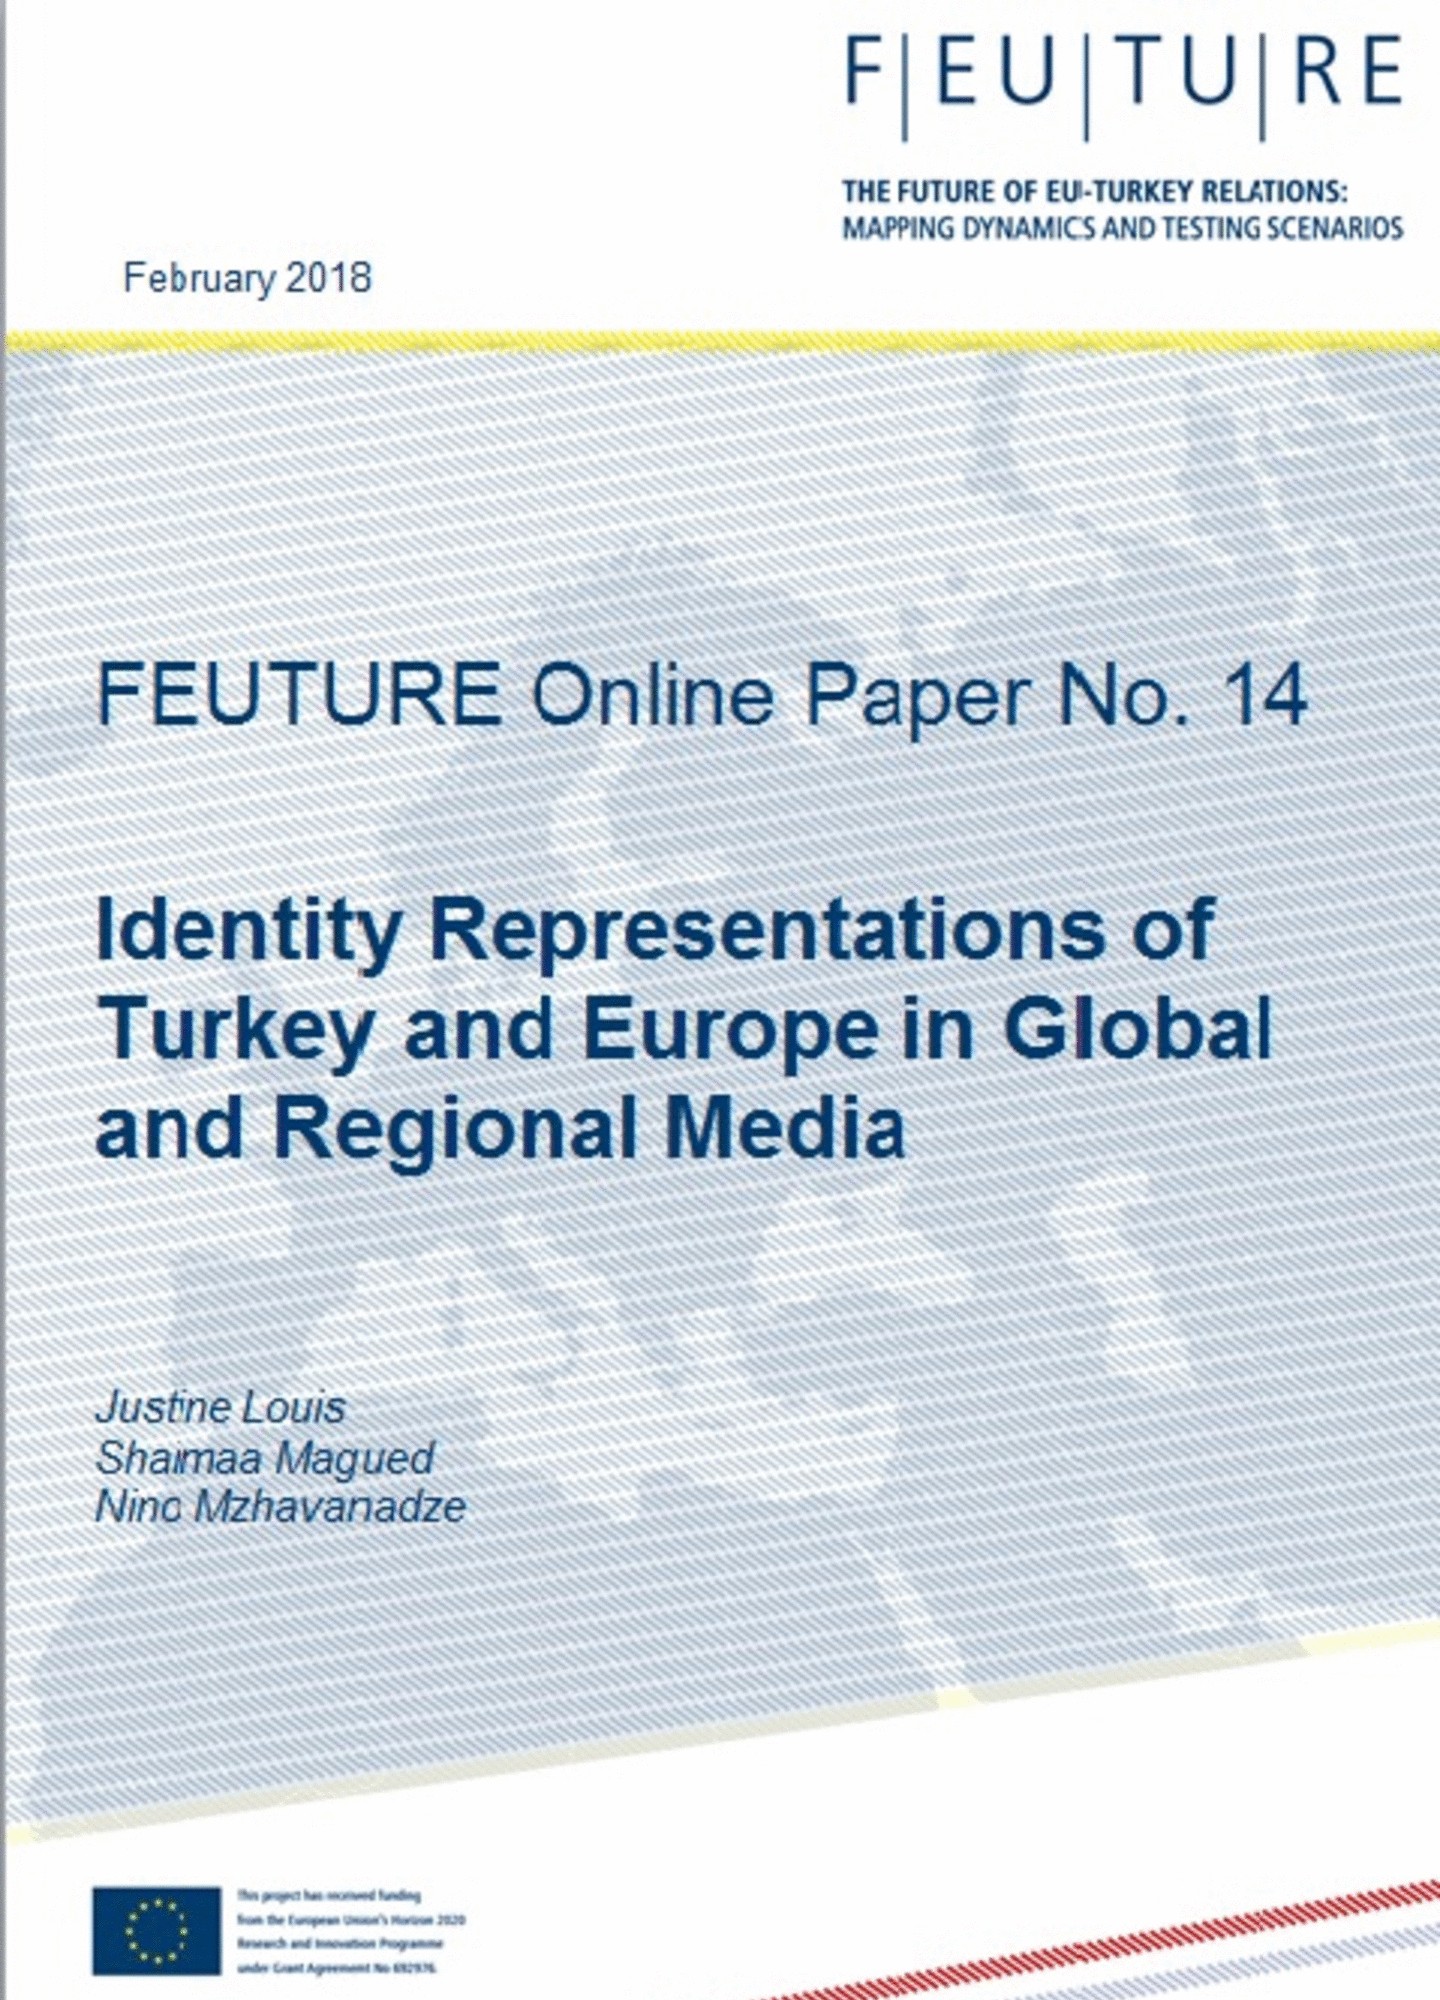 Identity Representations of Turkey and Europe in Global and Regional Media